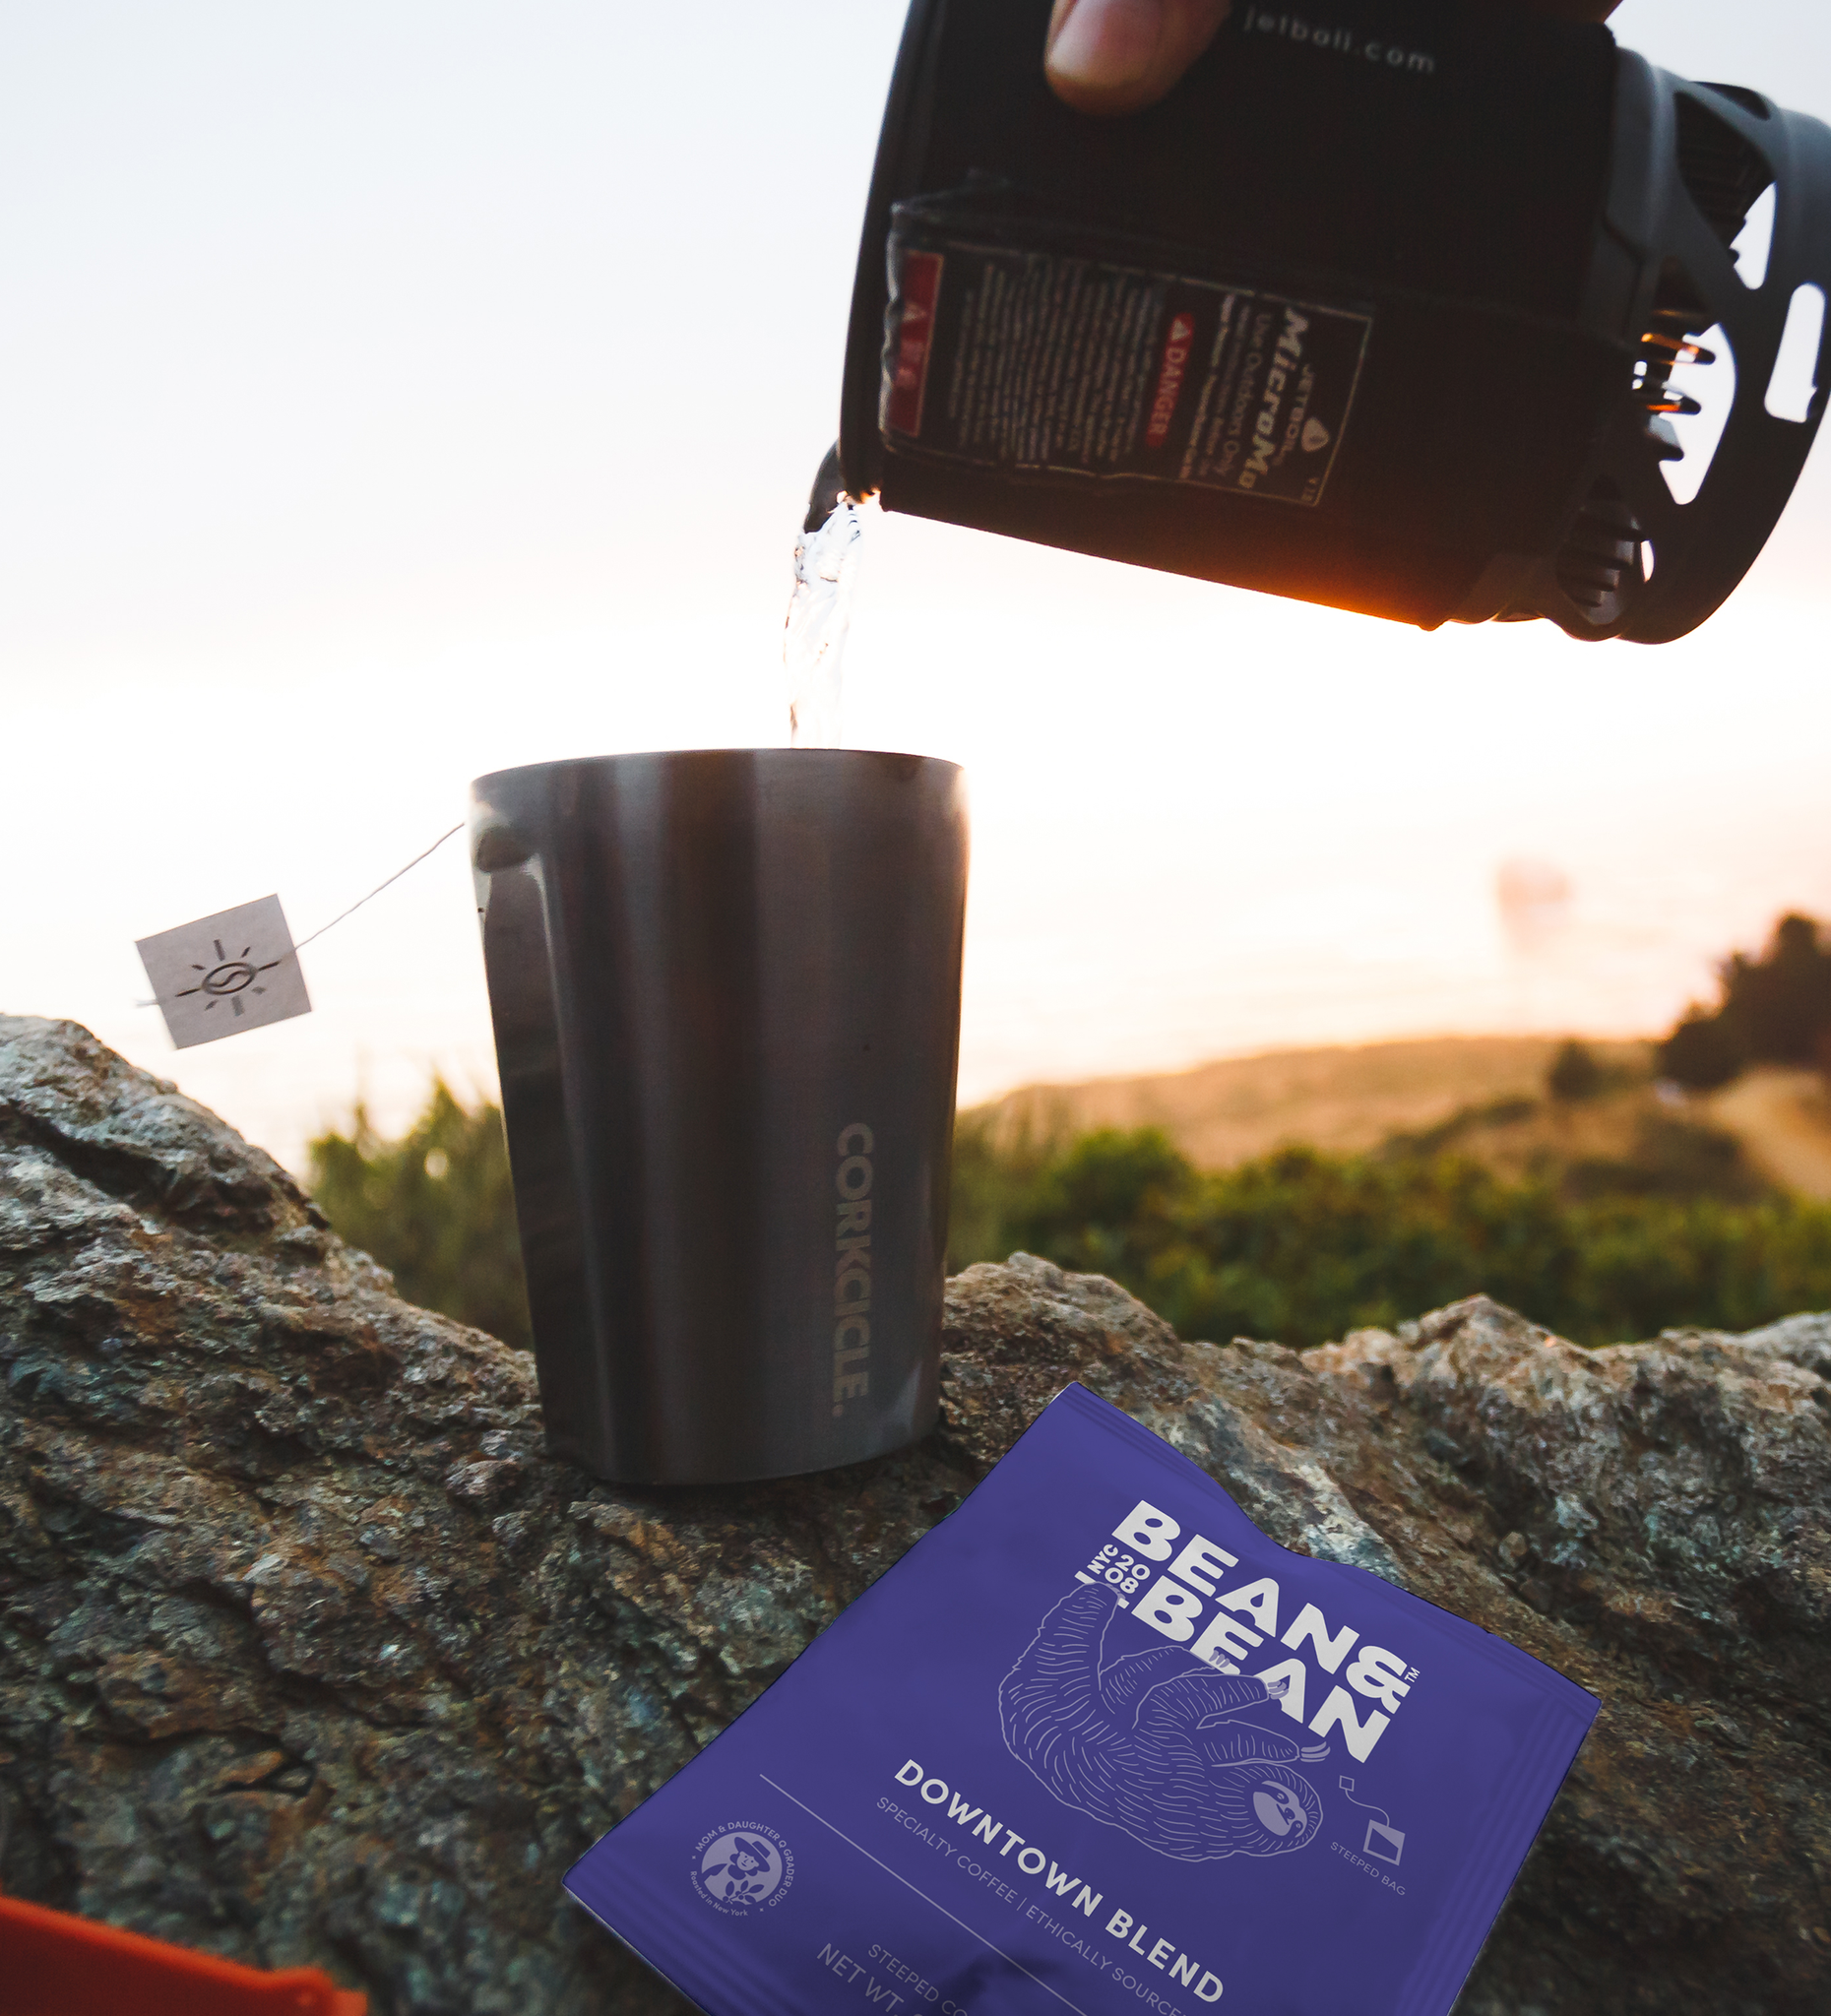 Bean & Bean Coffee Roasters. New York. NYC. Local Coffee Roasters. Downtown Blend. Specialty Coffee. Ethically Sourced. Steeped Coffee Bag. USDA Organic Certified. Fair Trade Certified. Instant Coffee. Camp Friendly Coffee. Camping Coffee. Cold Brew Bag. Cold Brew Steeped Bag.